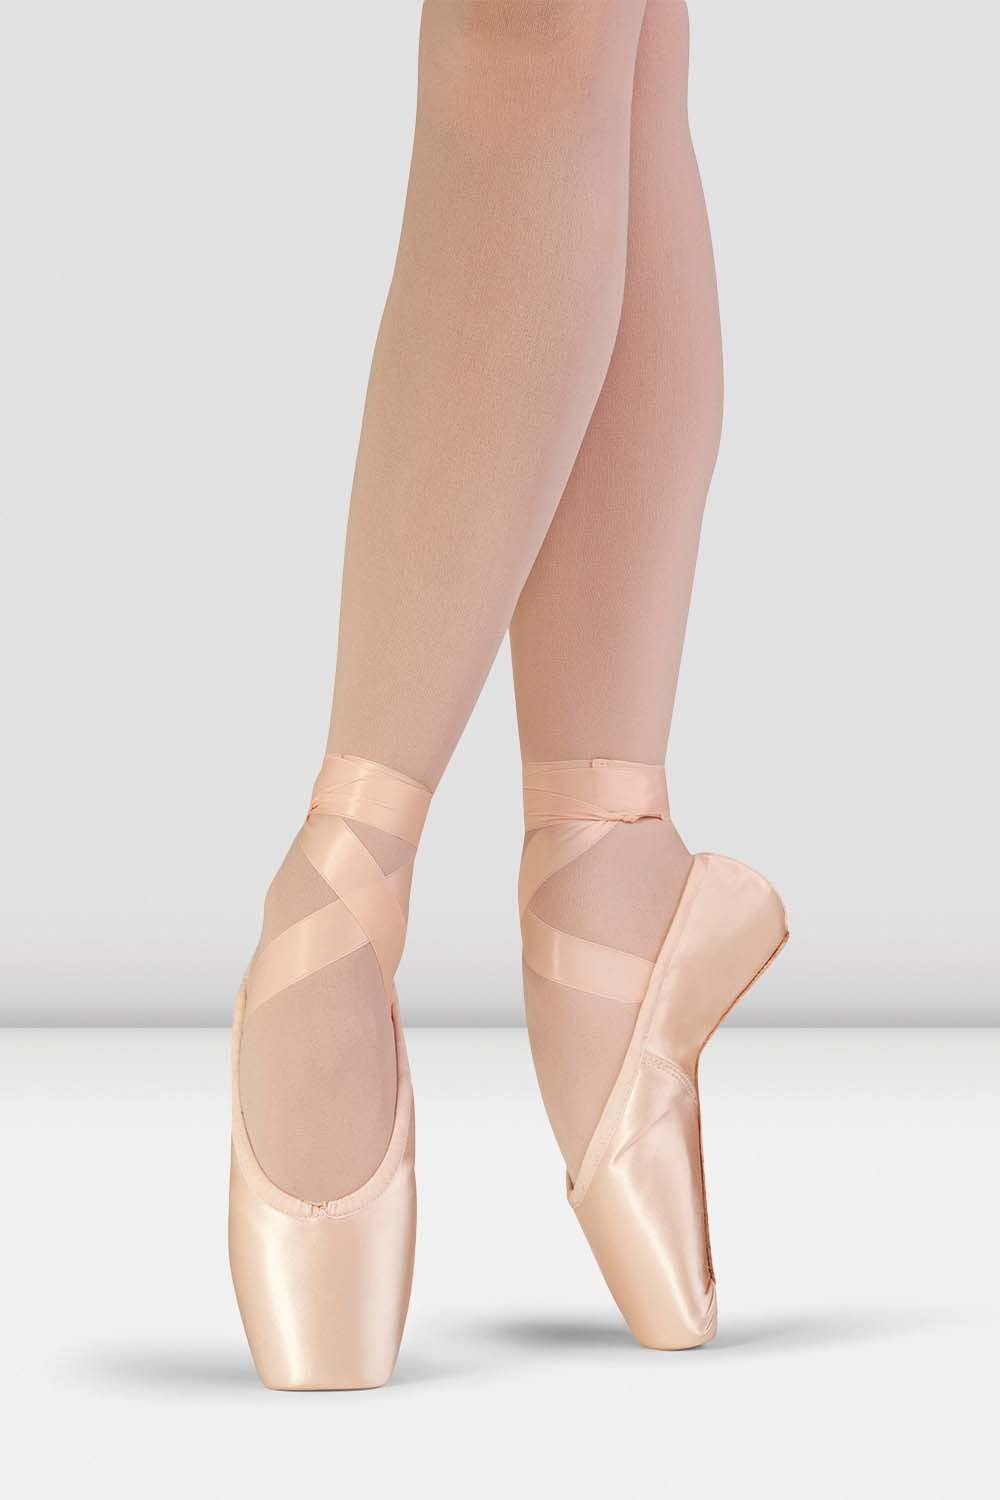 BLOCH Synthesis Stretch Pointe Shoes, Pink Satin